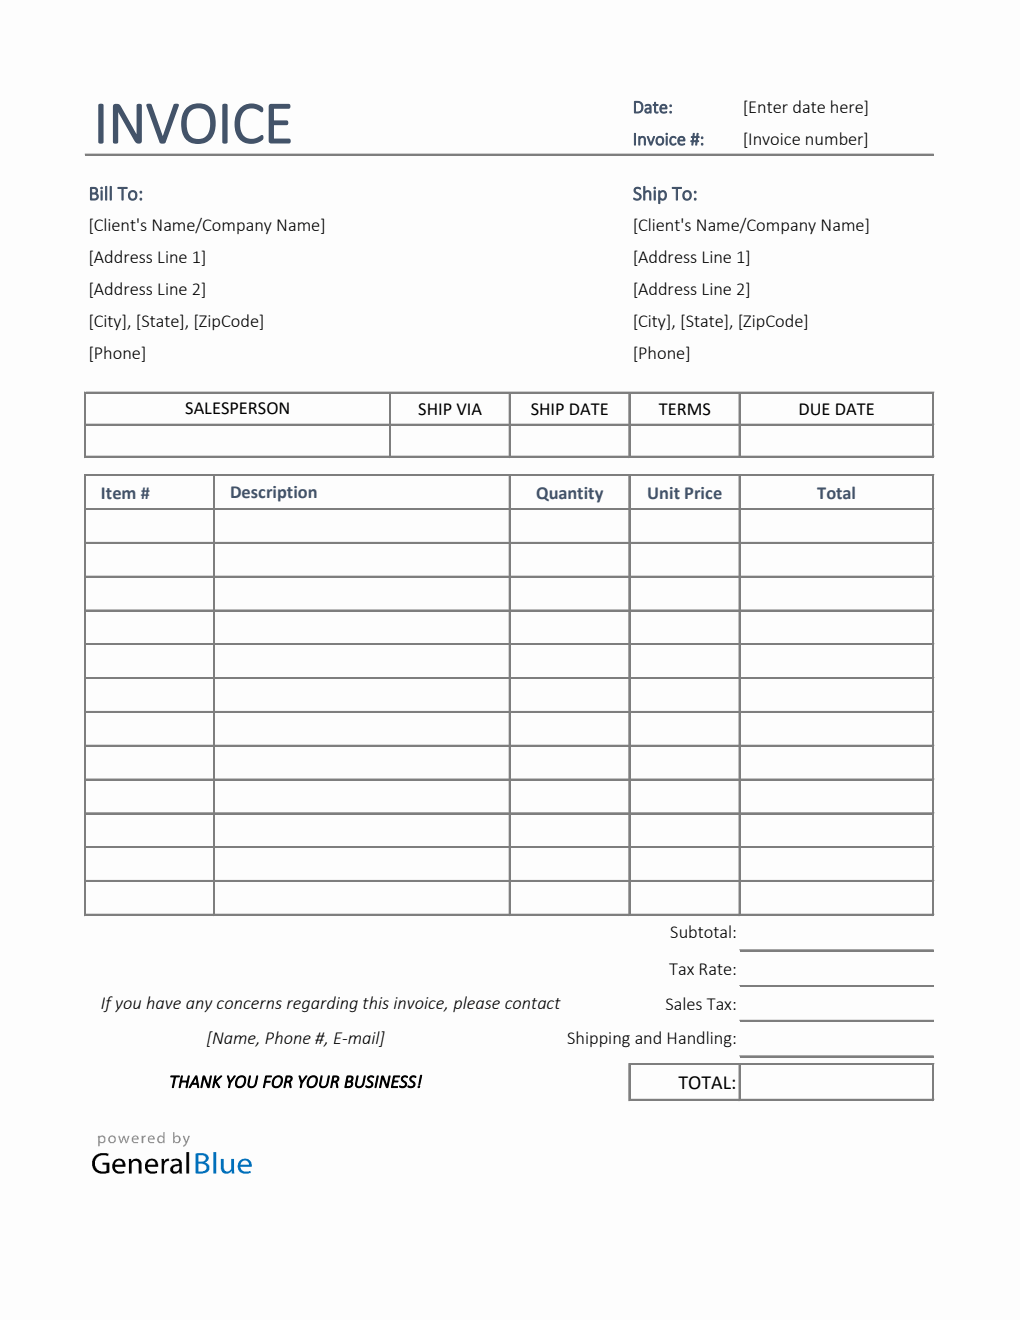 Sales Invoice Template in Excel (Simple) With Regard To Xl Invoice Template